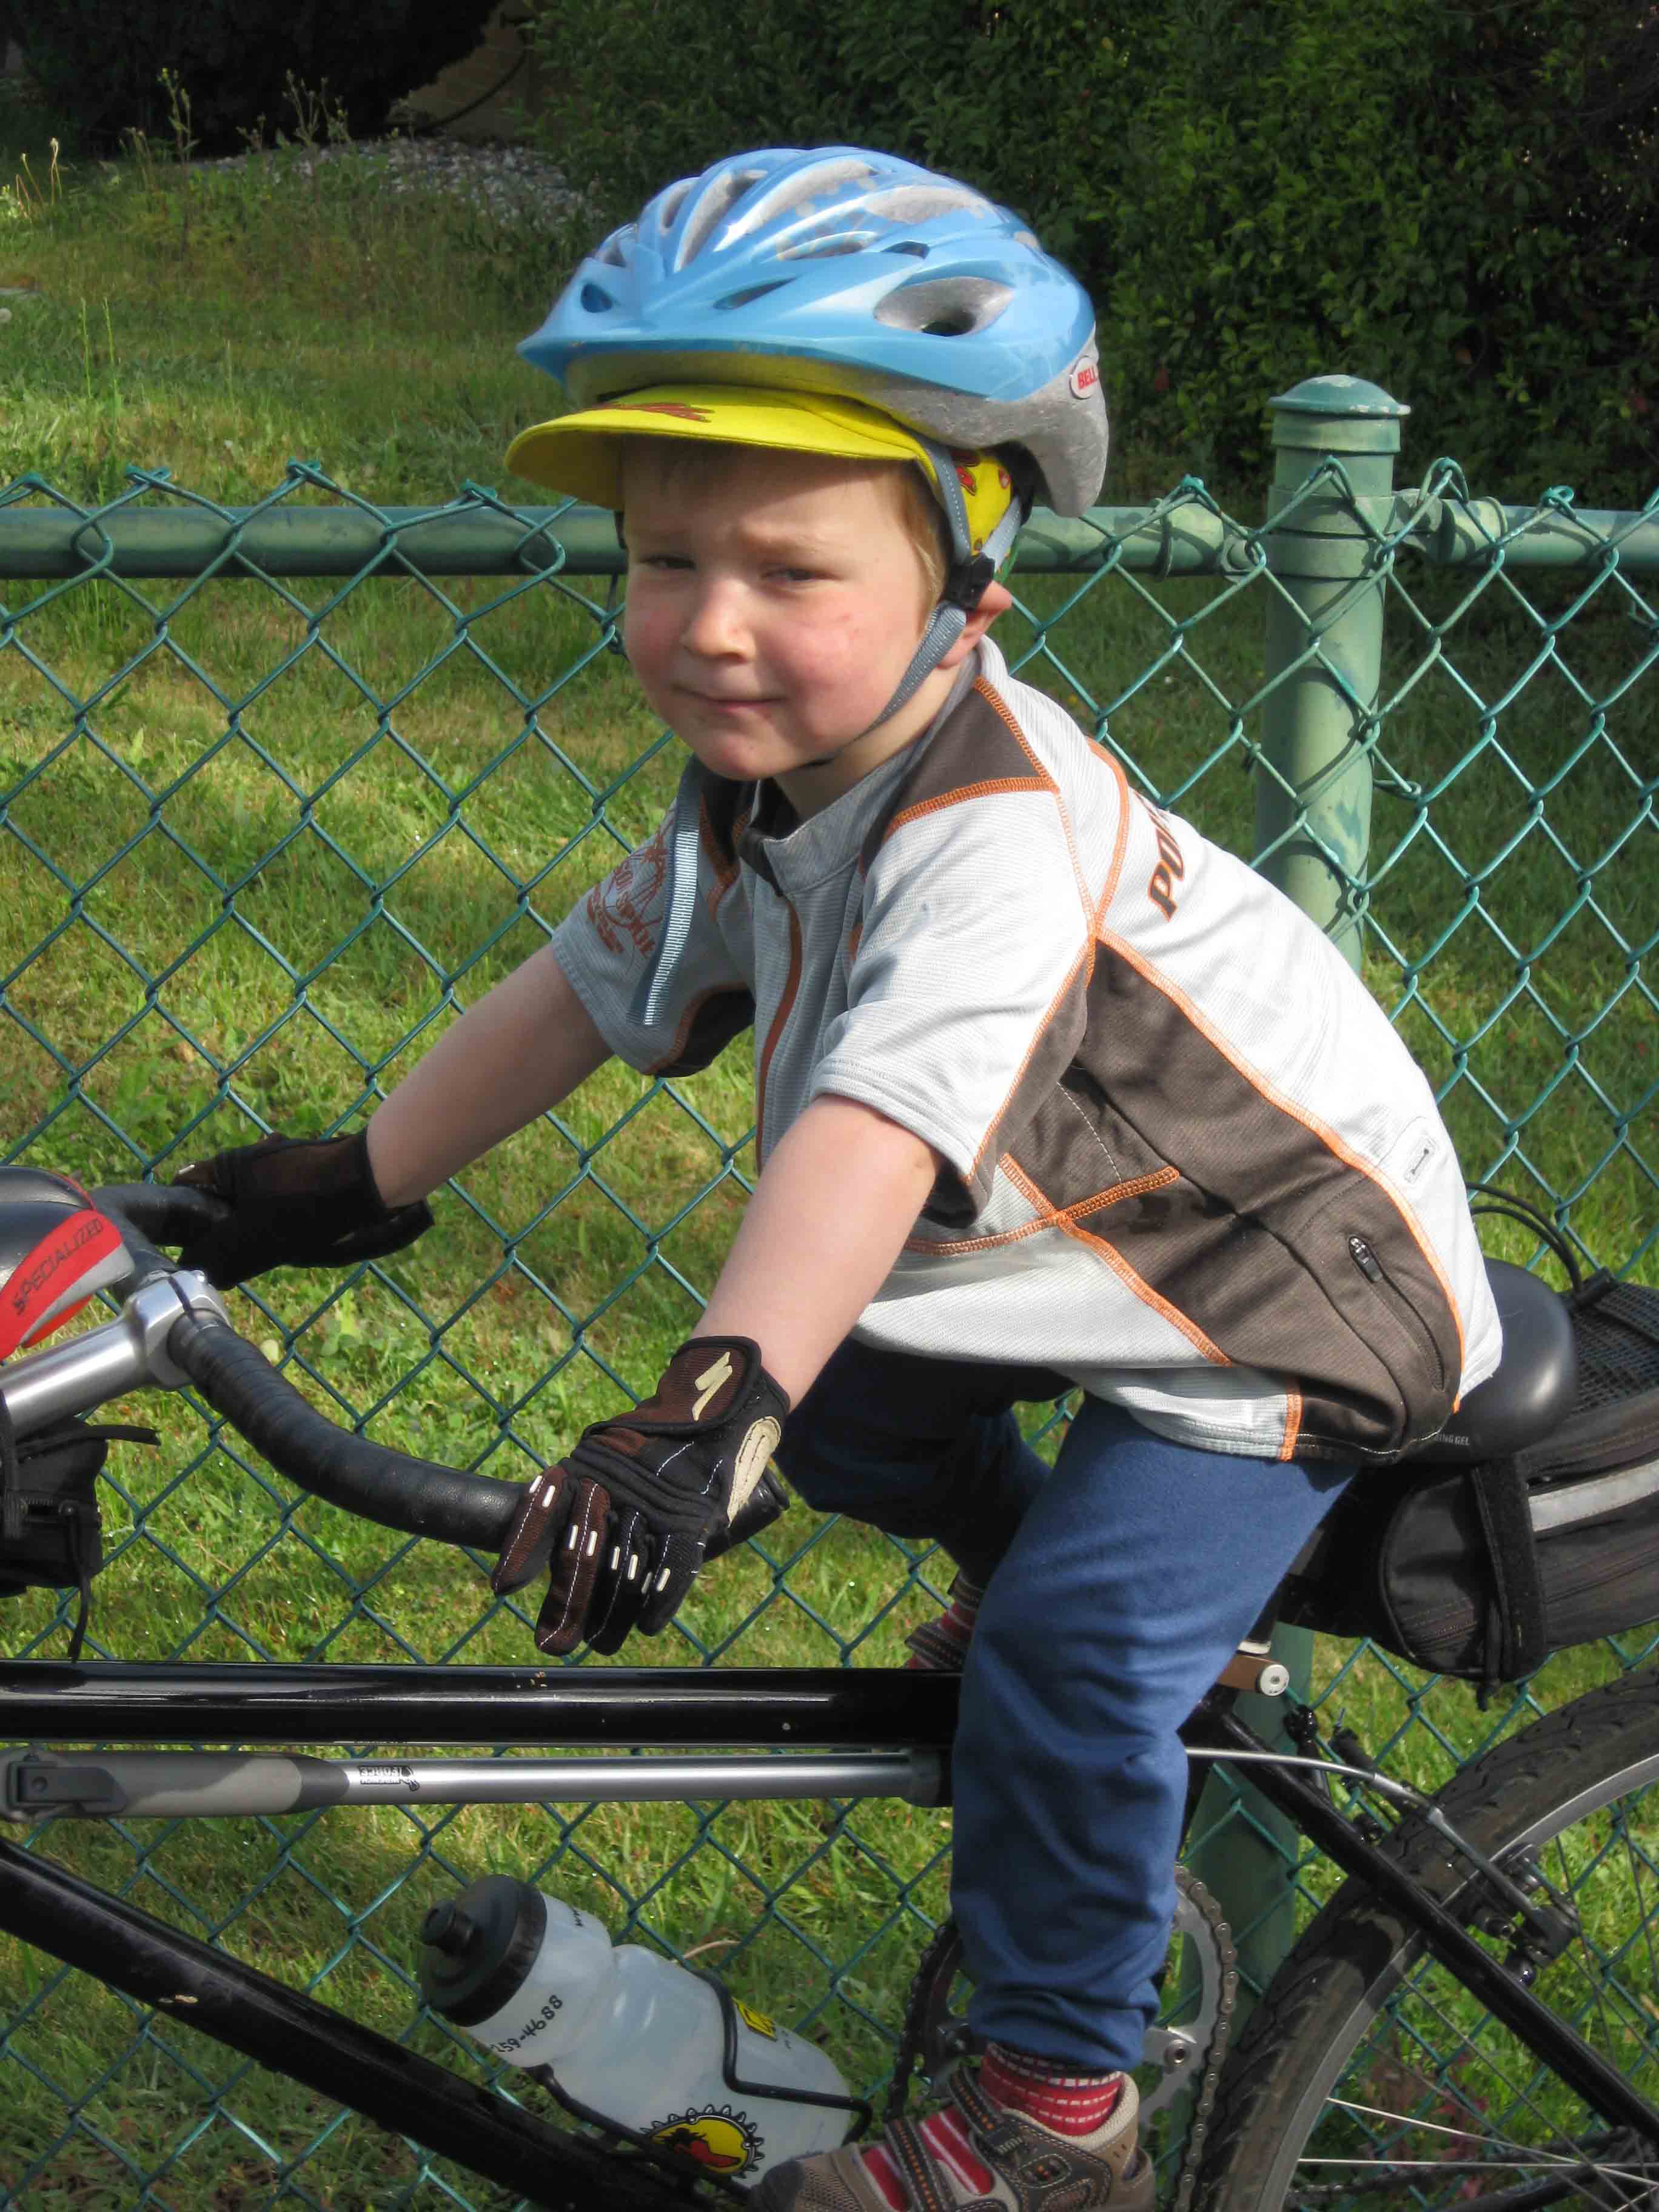 A child riding on a tandem bicycle